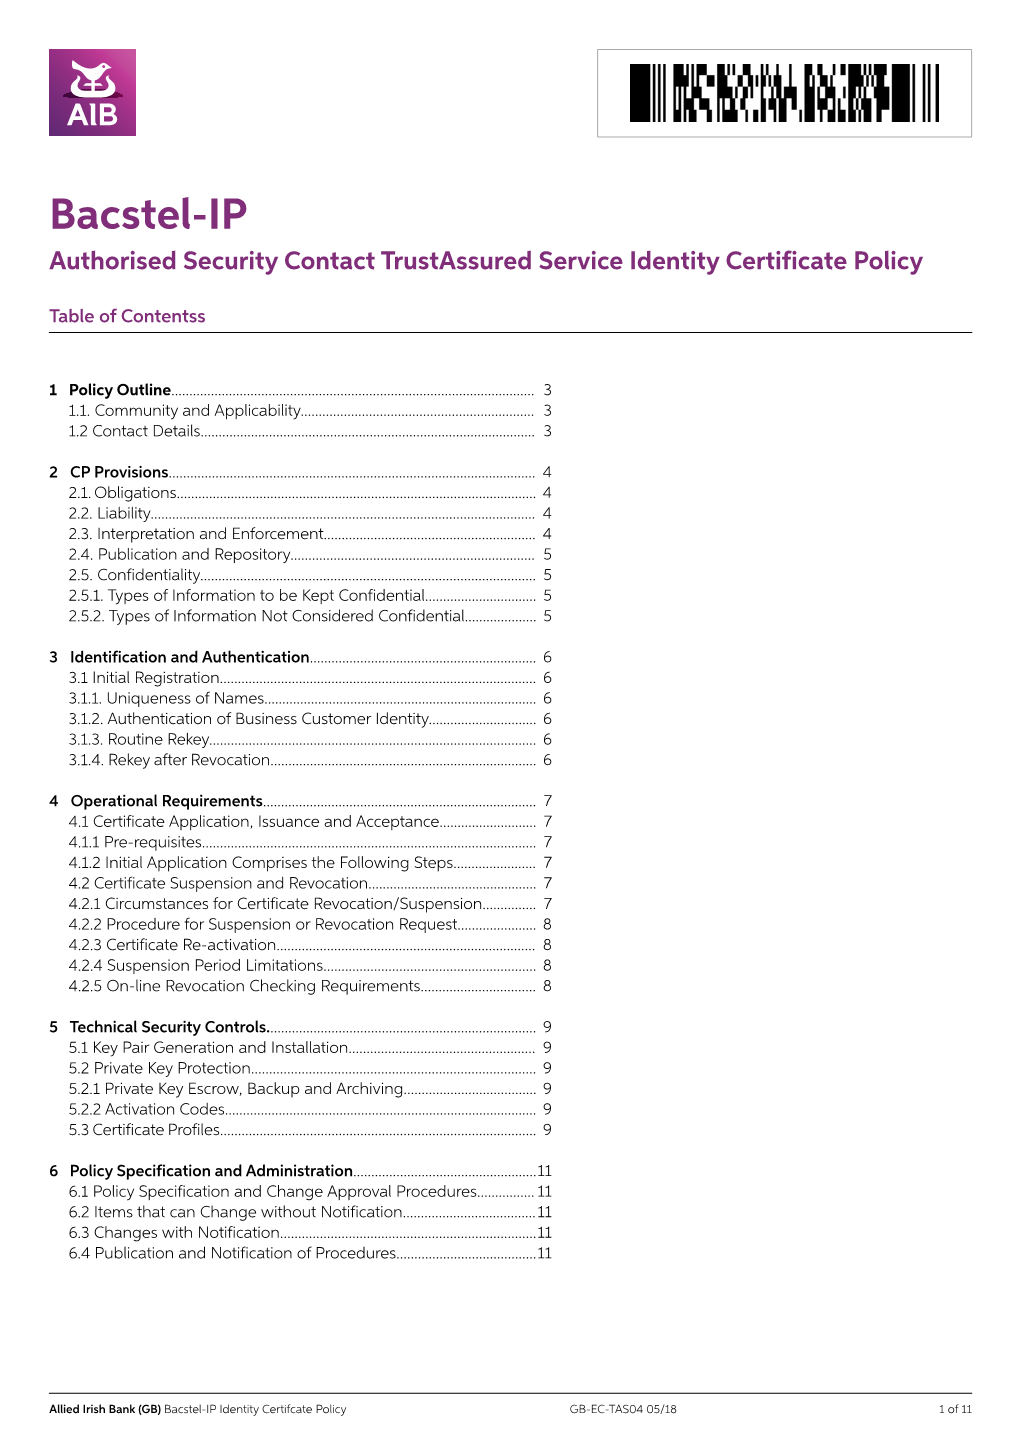 Bacstel-IP Authorised Security Contact Trustassured Service Identity Certificate Policy